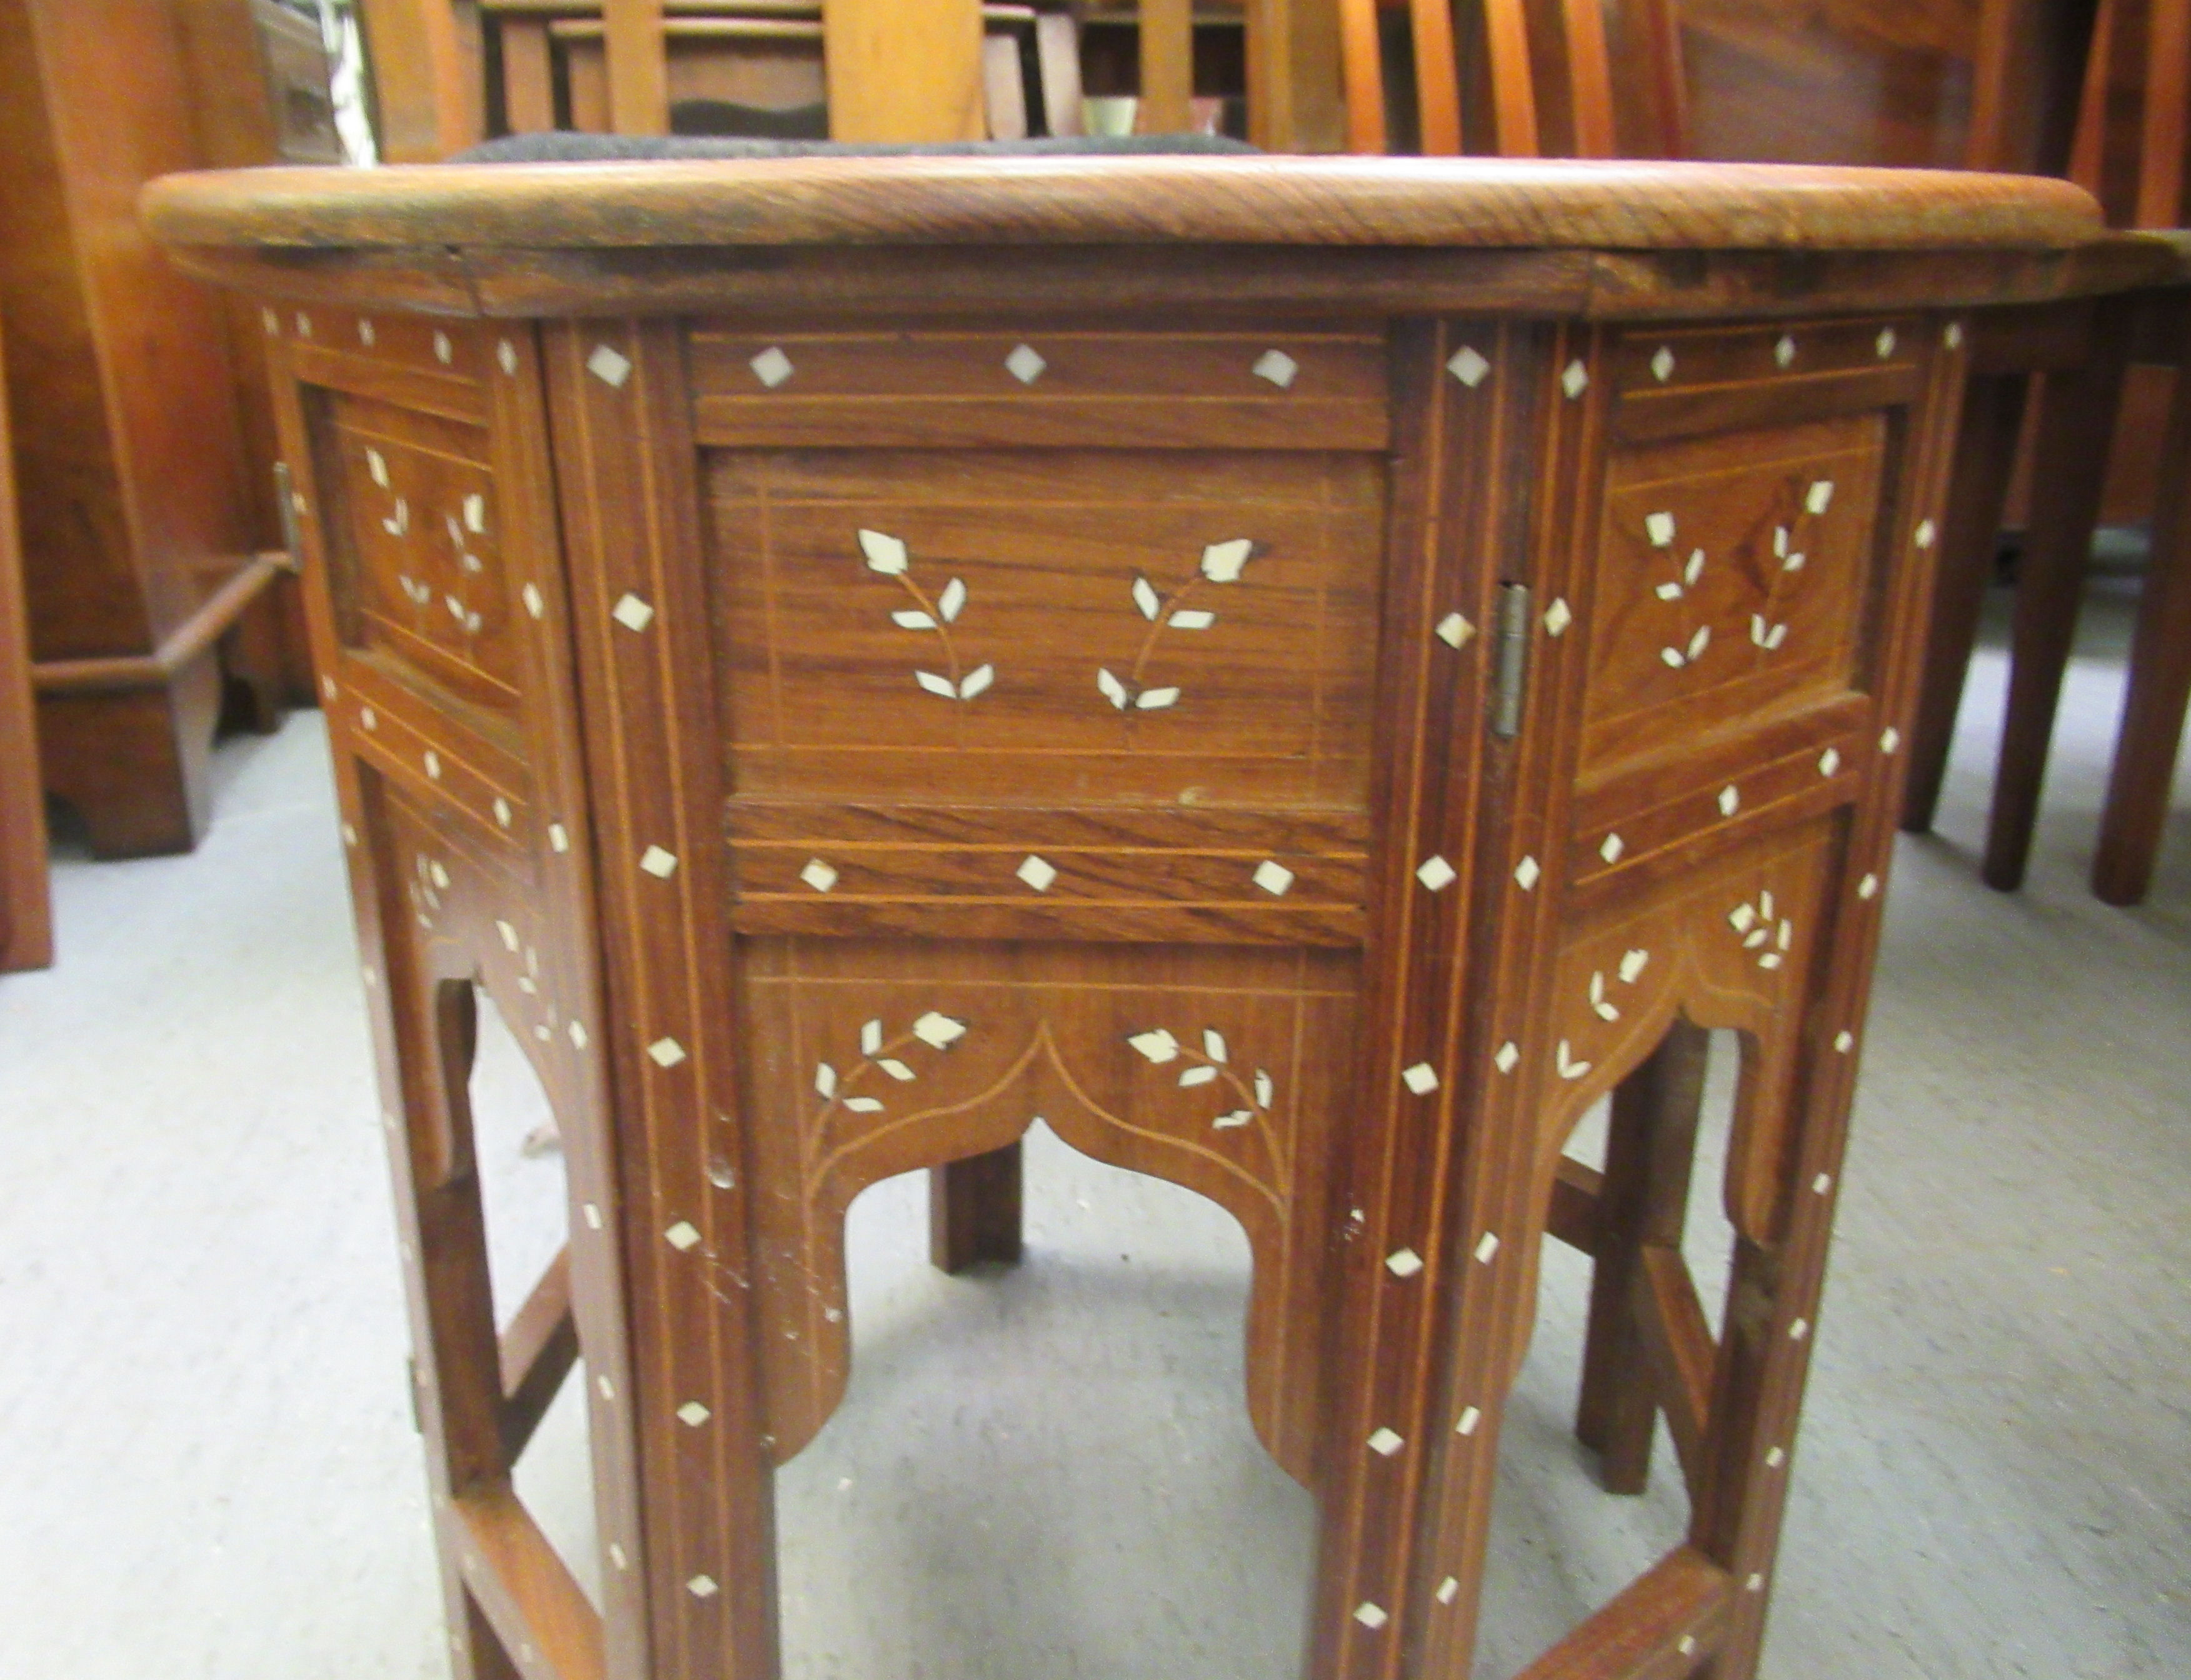 A 20thC Indian bone inlaid fruitwood occasional table, decorated with floral designs  18"h  18"dia - Image 3 of 4